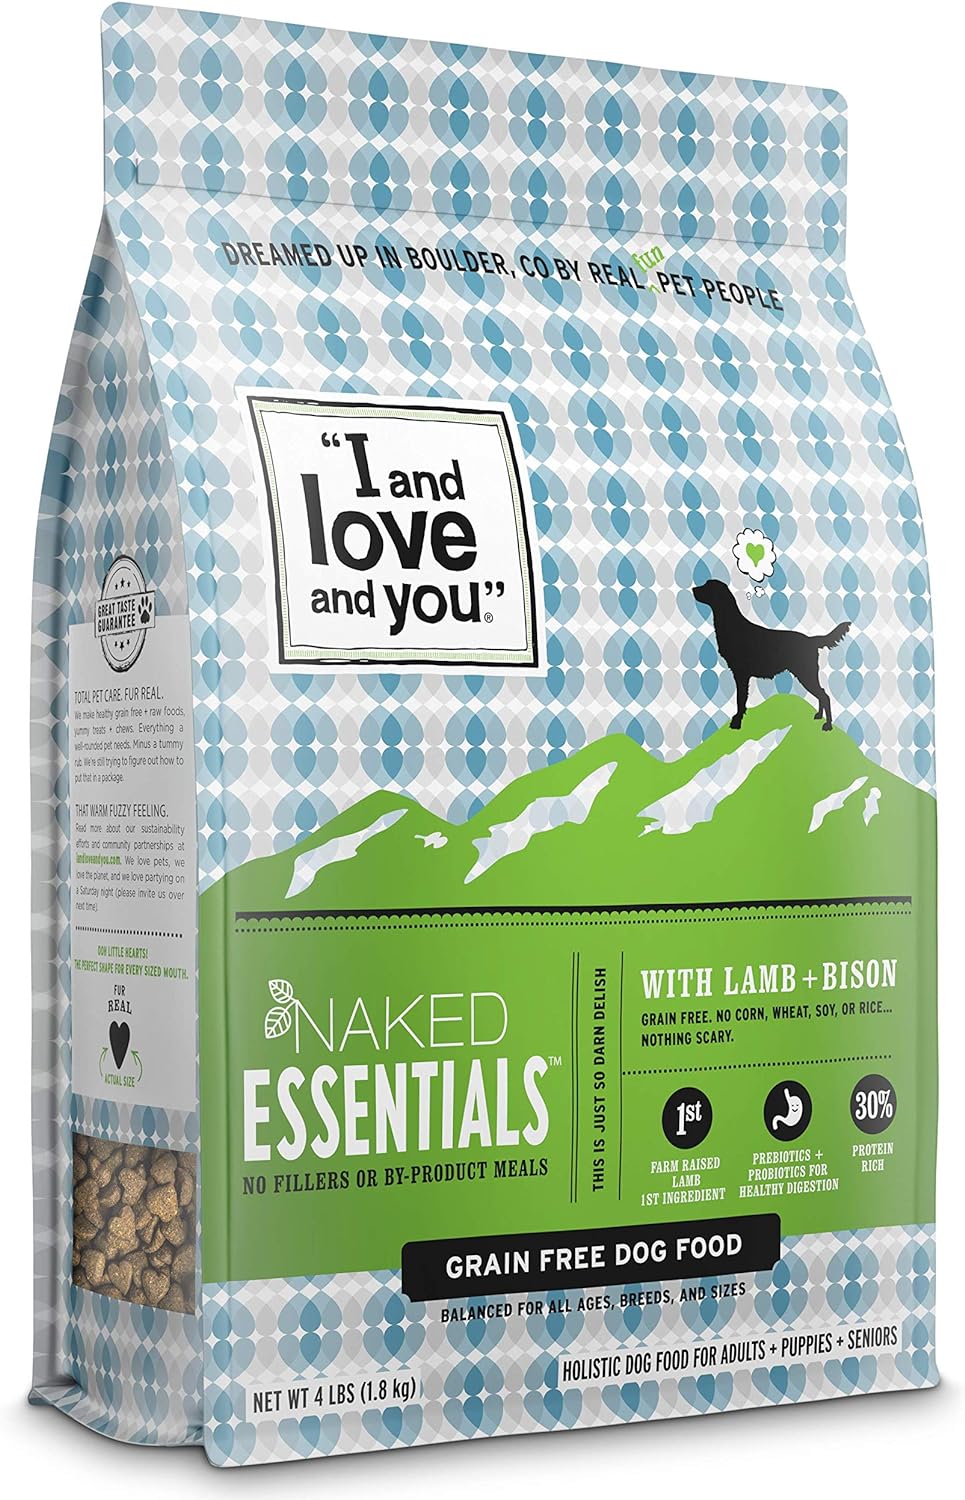 I and love and you Naked Essentials Dry Dog Food - Lamb + Bison - High Protein, Real Meat, No Fillers, Prebiotics + Probiotics, 4lb Bag